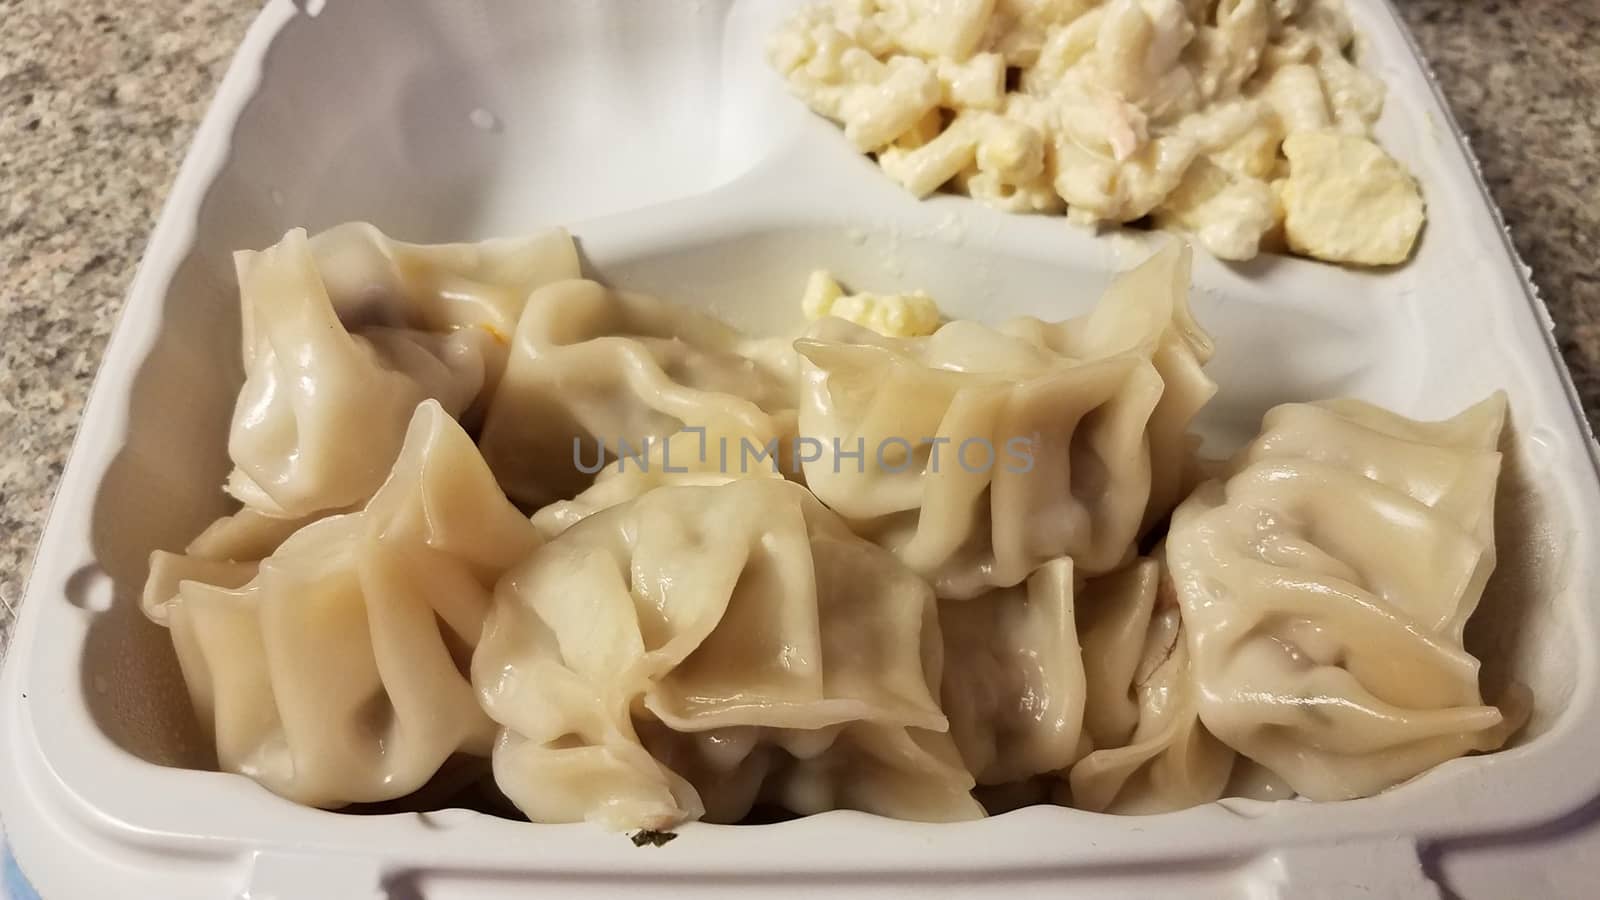 take out container of dumplings and macaroni salad on counter